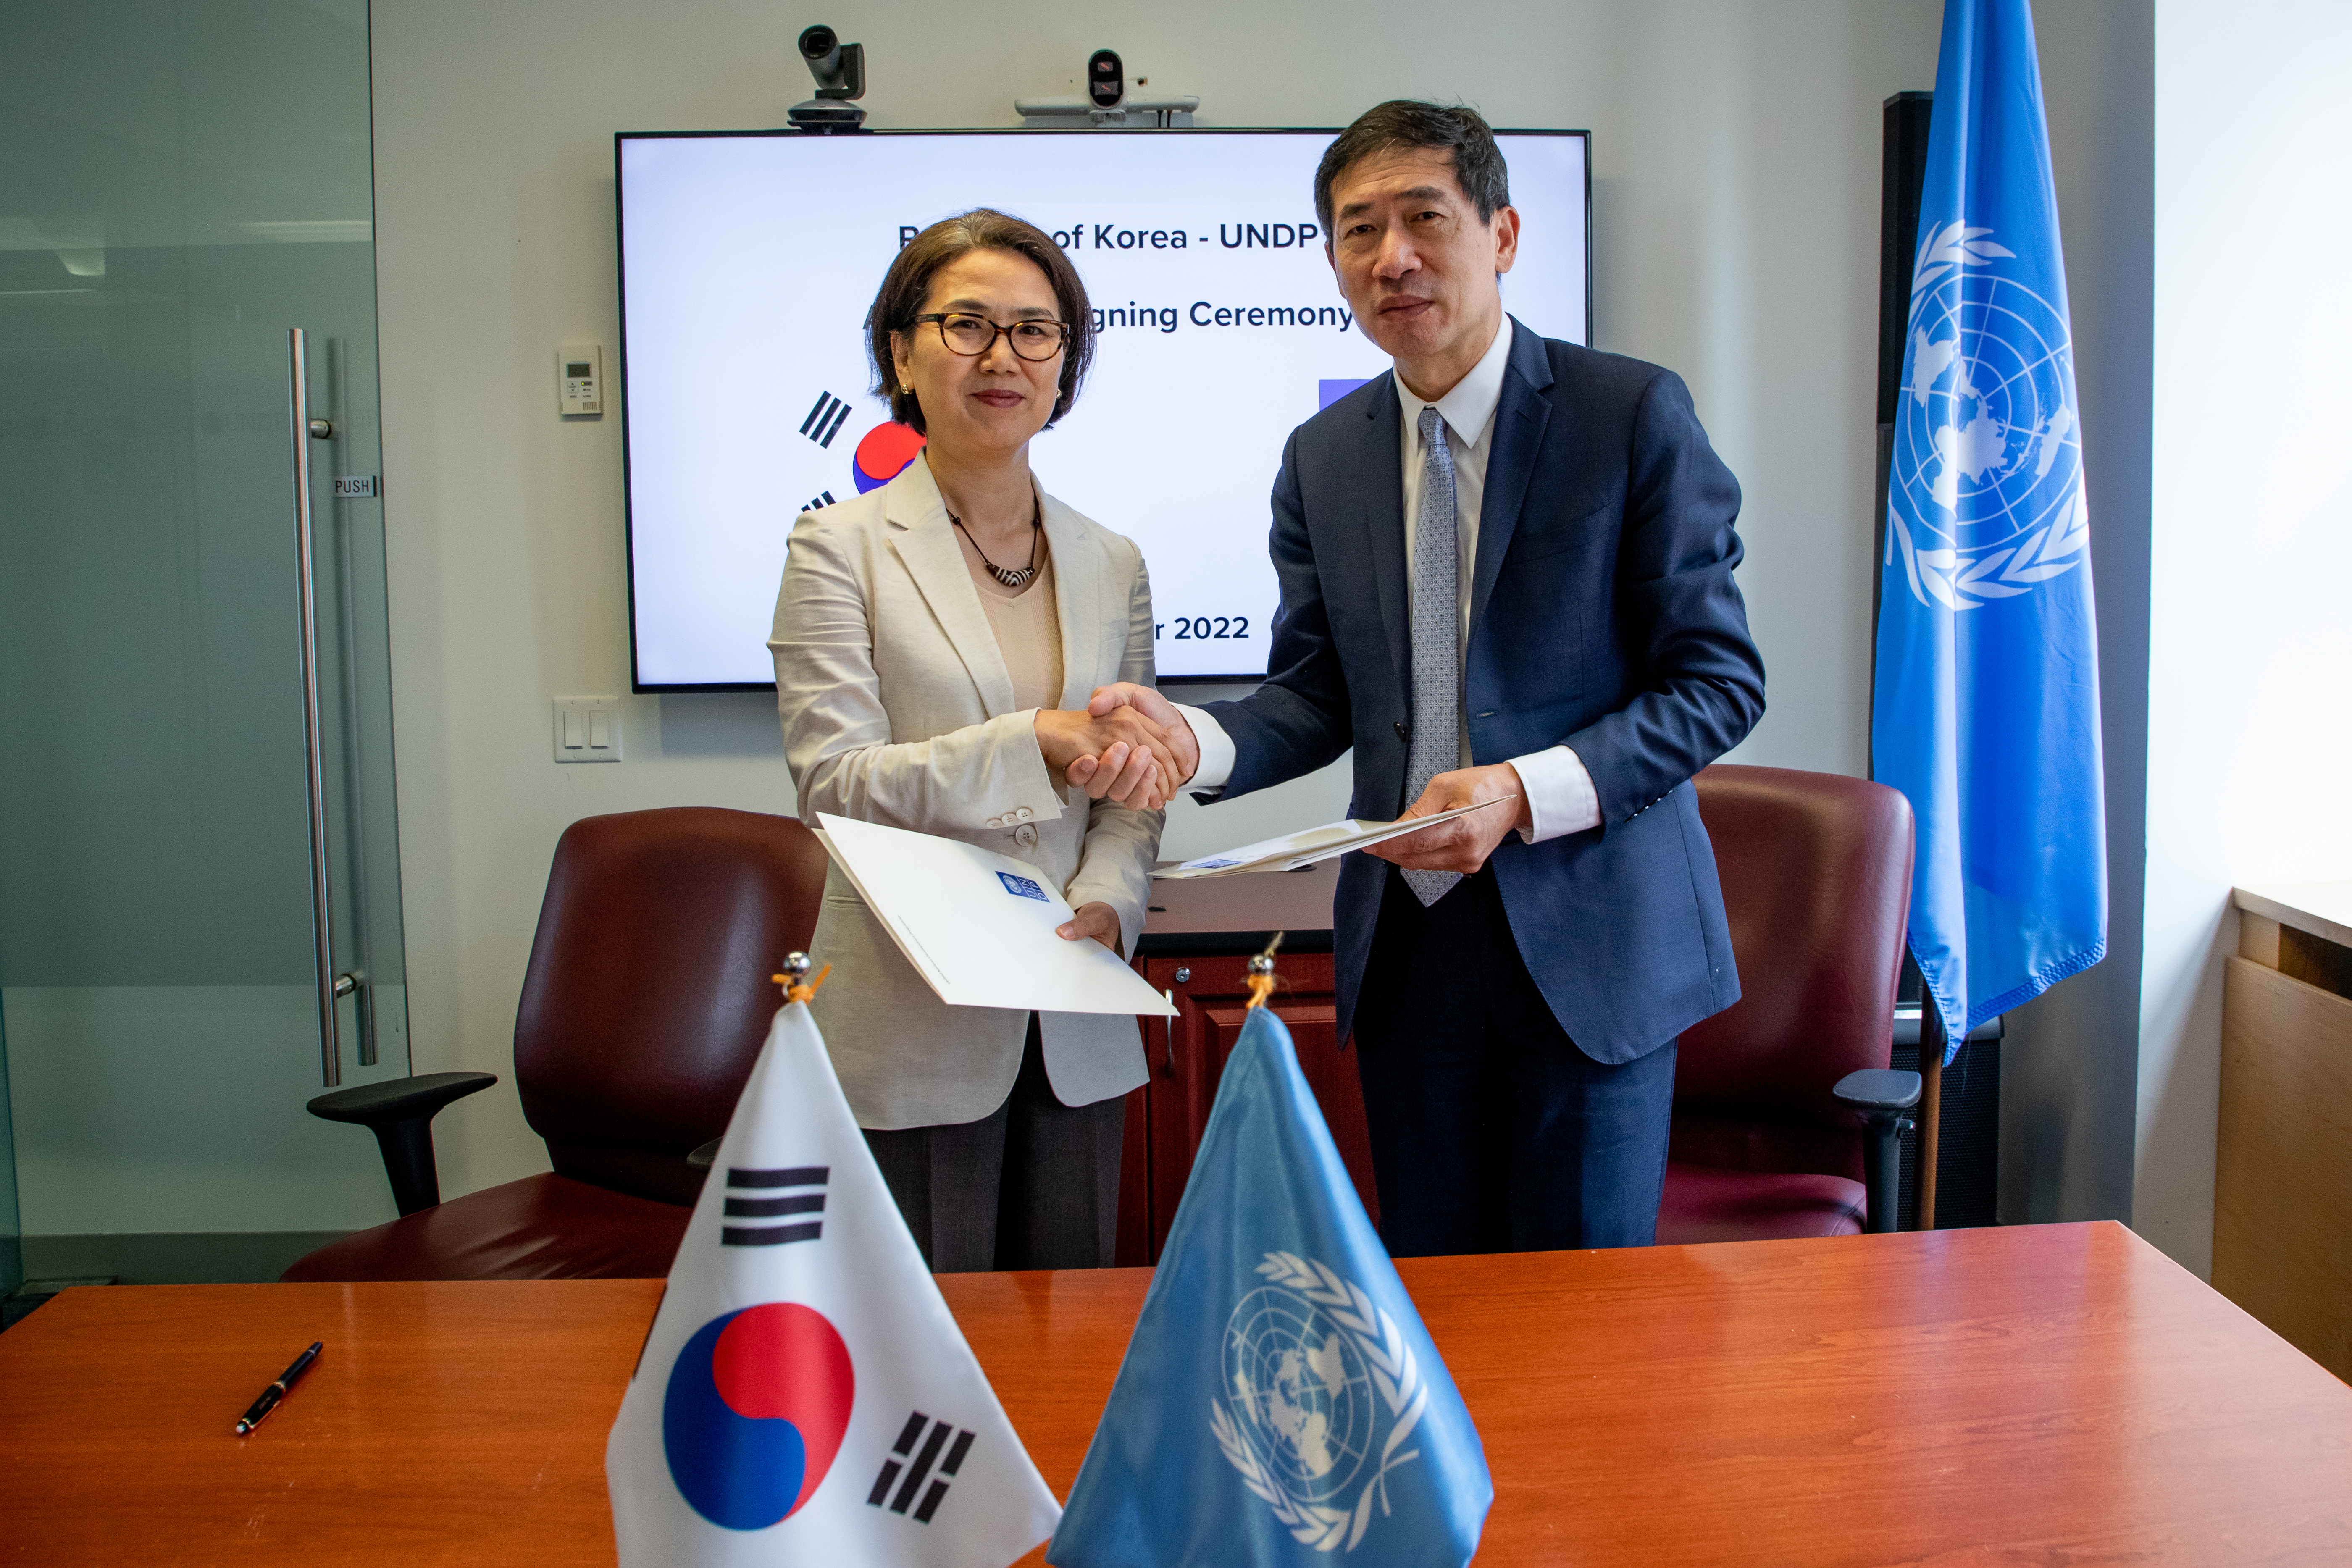 Ms. Oh Hyunjoo, Deputy Permanent Representative on behalf of the Republic of Korea and Haoliang Xu, UN Assistant Secretary General and Director, Bureau for Policy and Programme Support on behalf of UNDP sign agreement to promote sustainable development. 